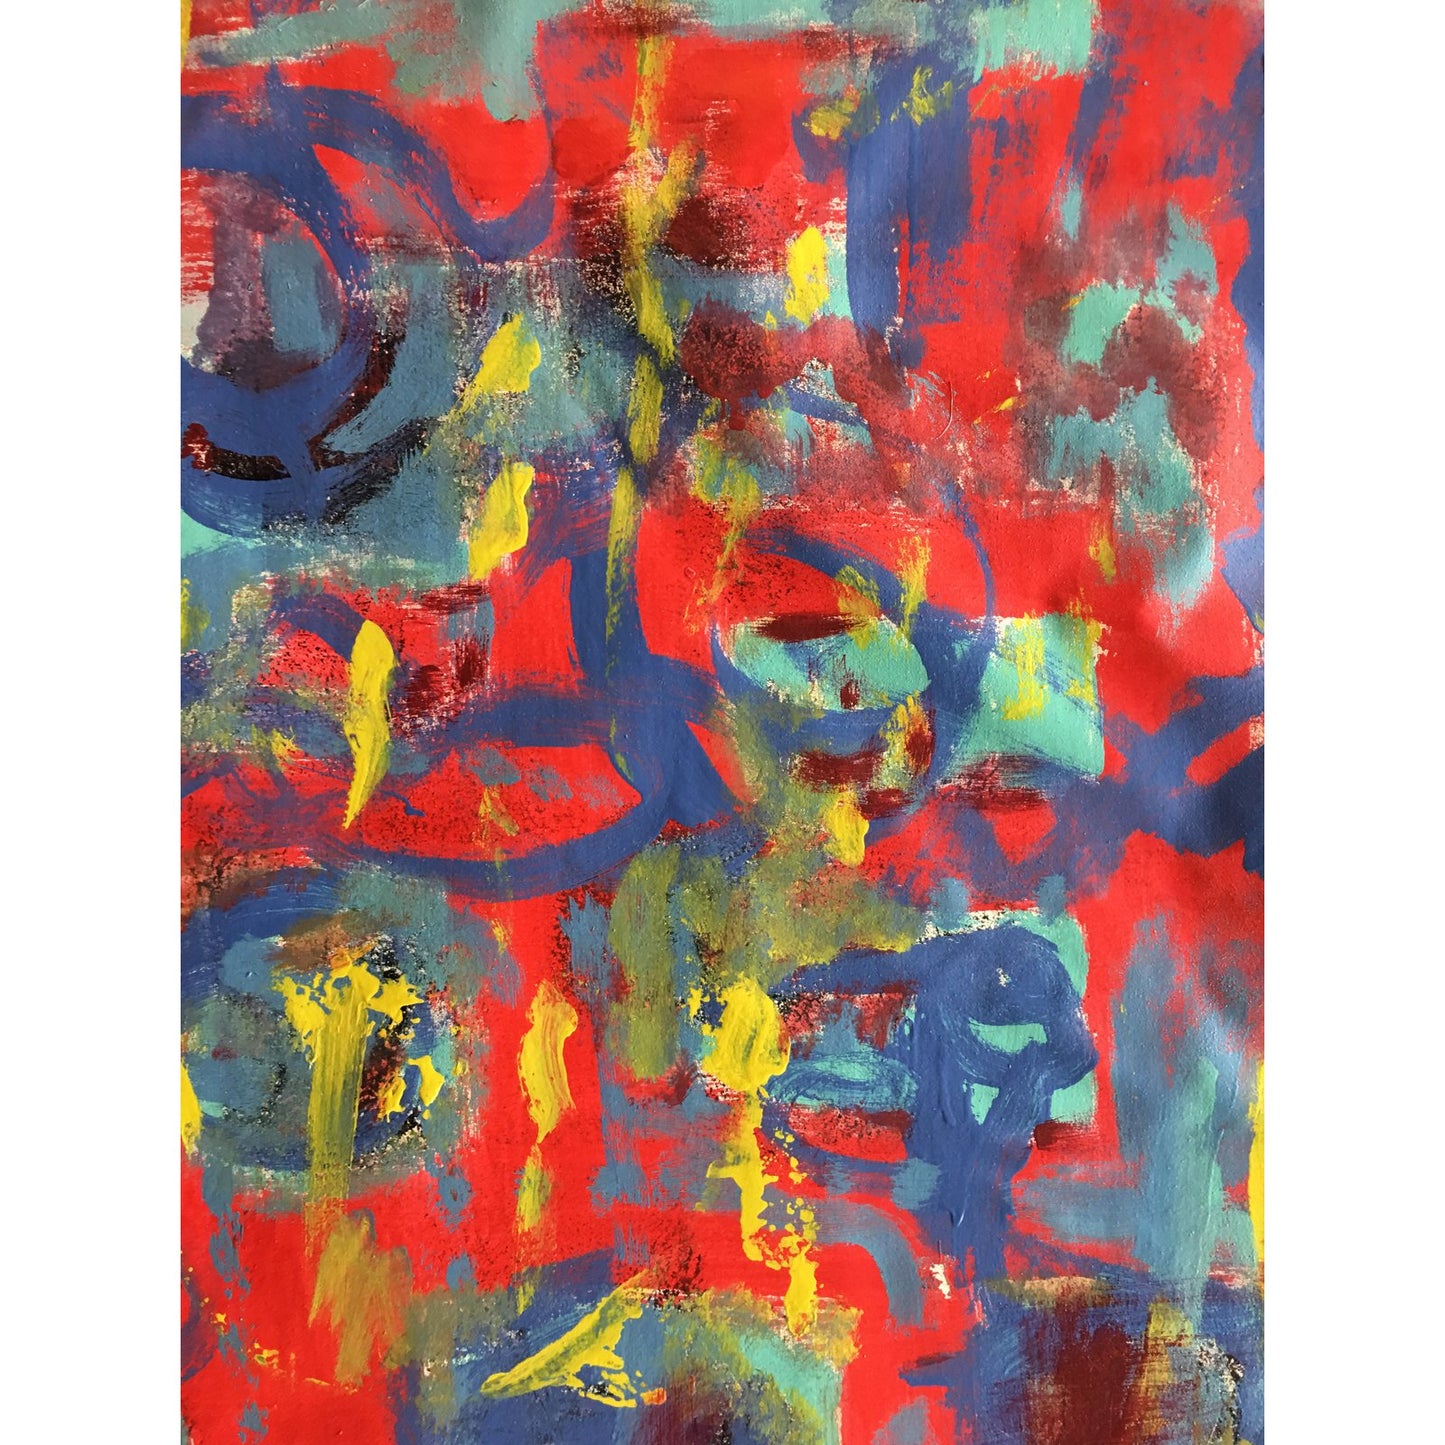 [SOLD] Abstract Acrylic Painting, "What Should I Do?" by Alaina Suga Lane